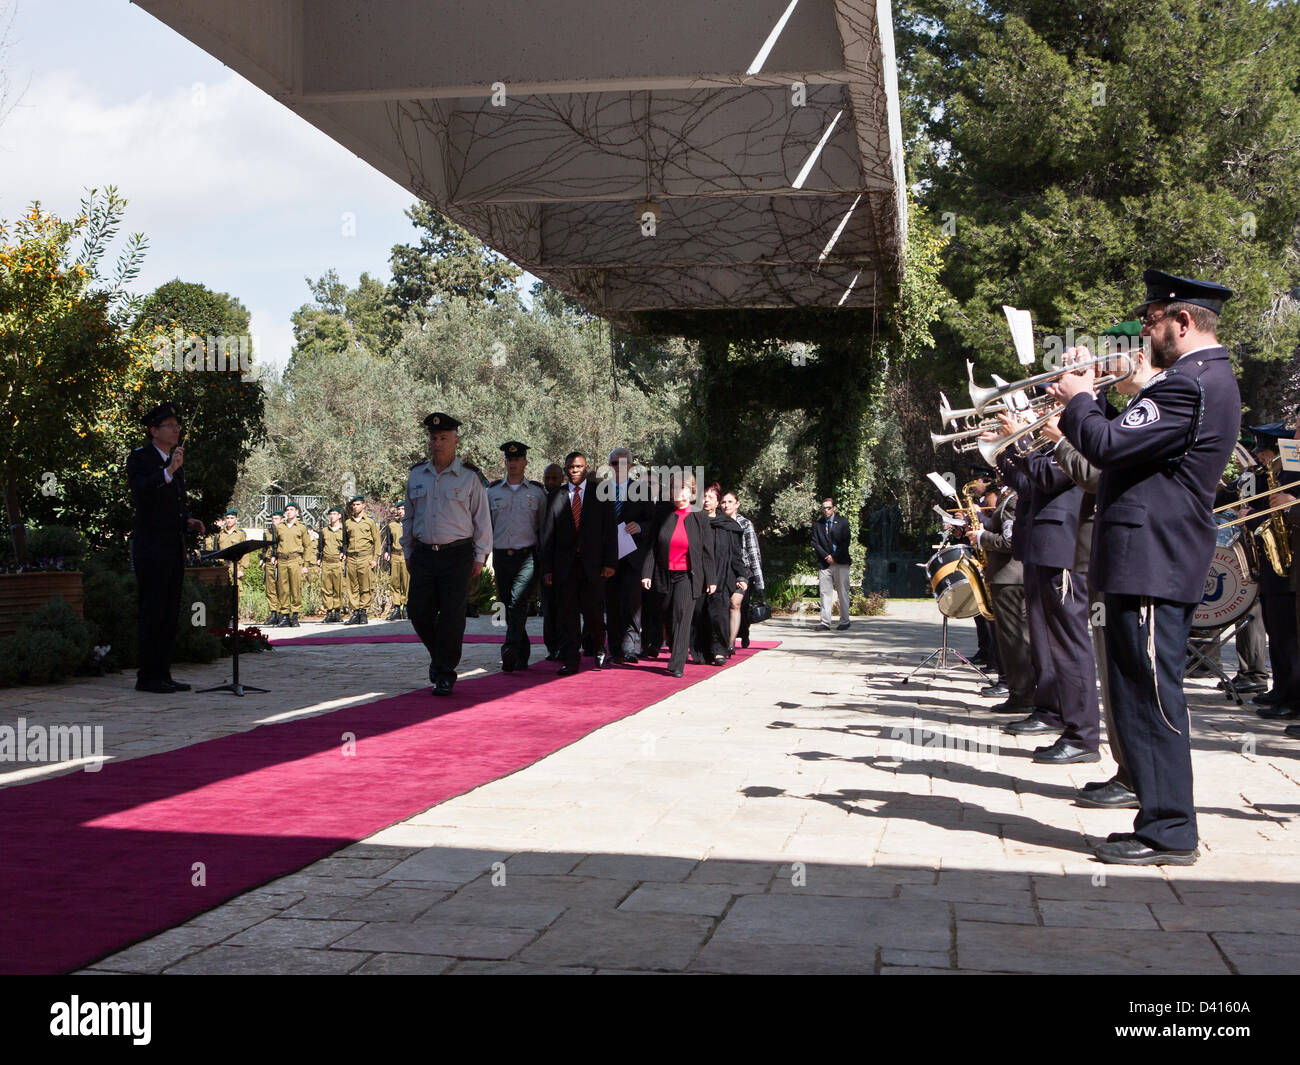 Jerusalem, Israel. 28th February 2013. Mr. Sisa Ngombane, newly appointed Republic of South Africa Ambassador to Israel, is welcomed at the President's Residence with a military honor guard as the Israel Police Band plays the South African National Anthem. Jerusalem, Israel.   Mr. Sisa Ngombane, newly appointed Republic of South Africa Ambassador to Israel, presented his Letter of Credence to the President of the State of Israel, Shimon Peres, in a formal ceremony at the President's Residence.  Credit:  Nir Alon / Alamy Live News Stock Photo